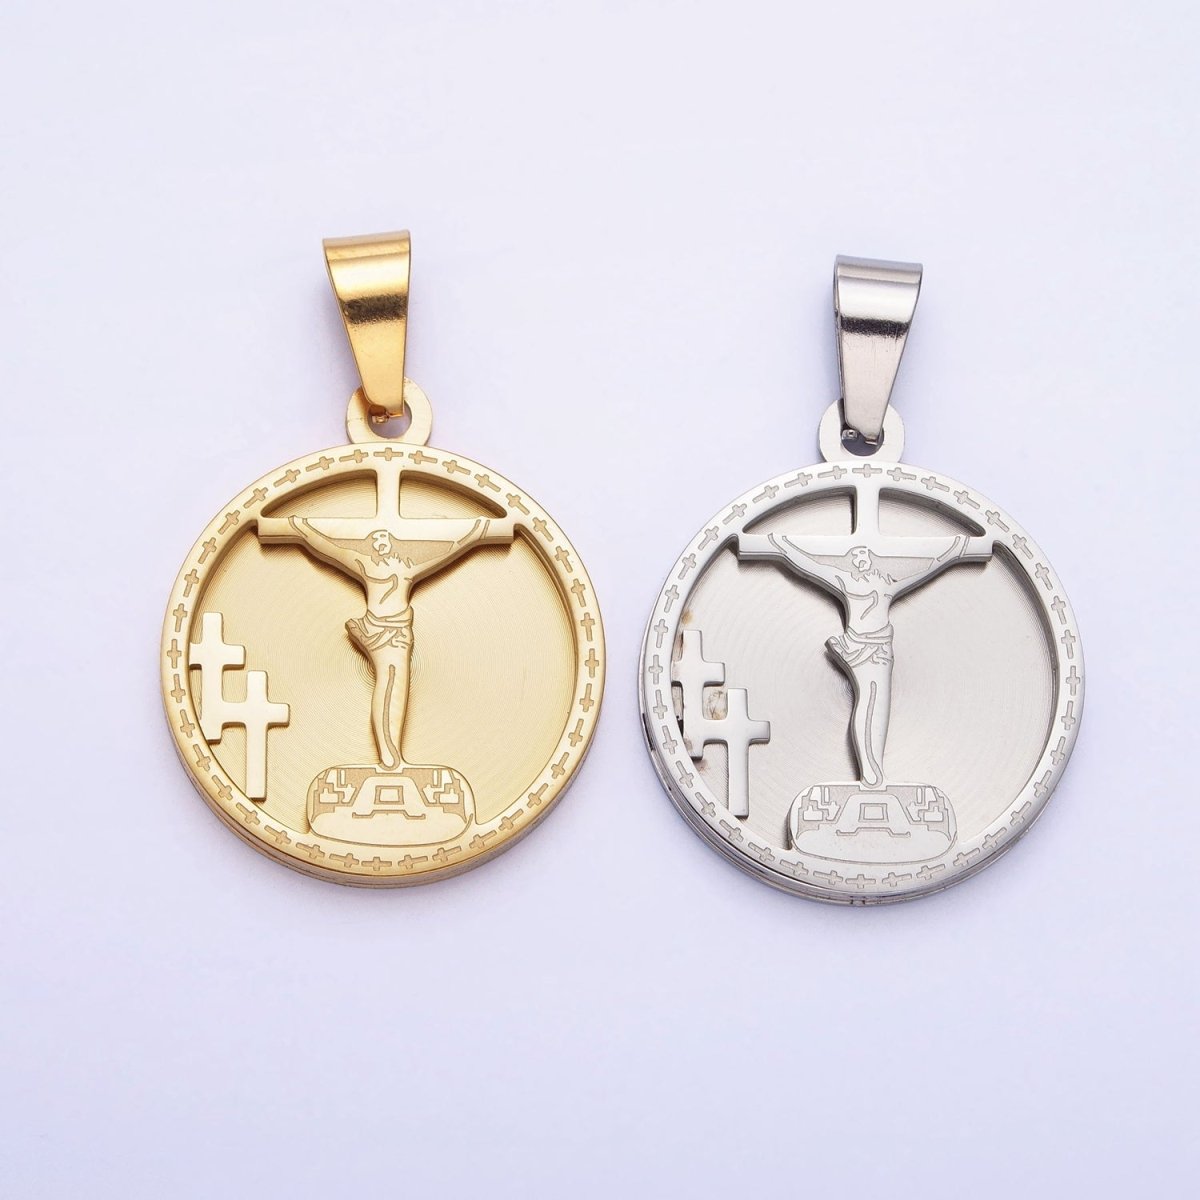 Medallion Gold Charm Stainless Steel Crucifix Cross Pendant in Gold Silver for Statement Religious Jewelry Making | P-1165 - DLUXCA